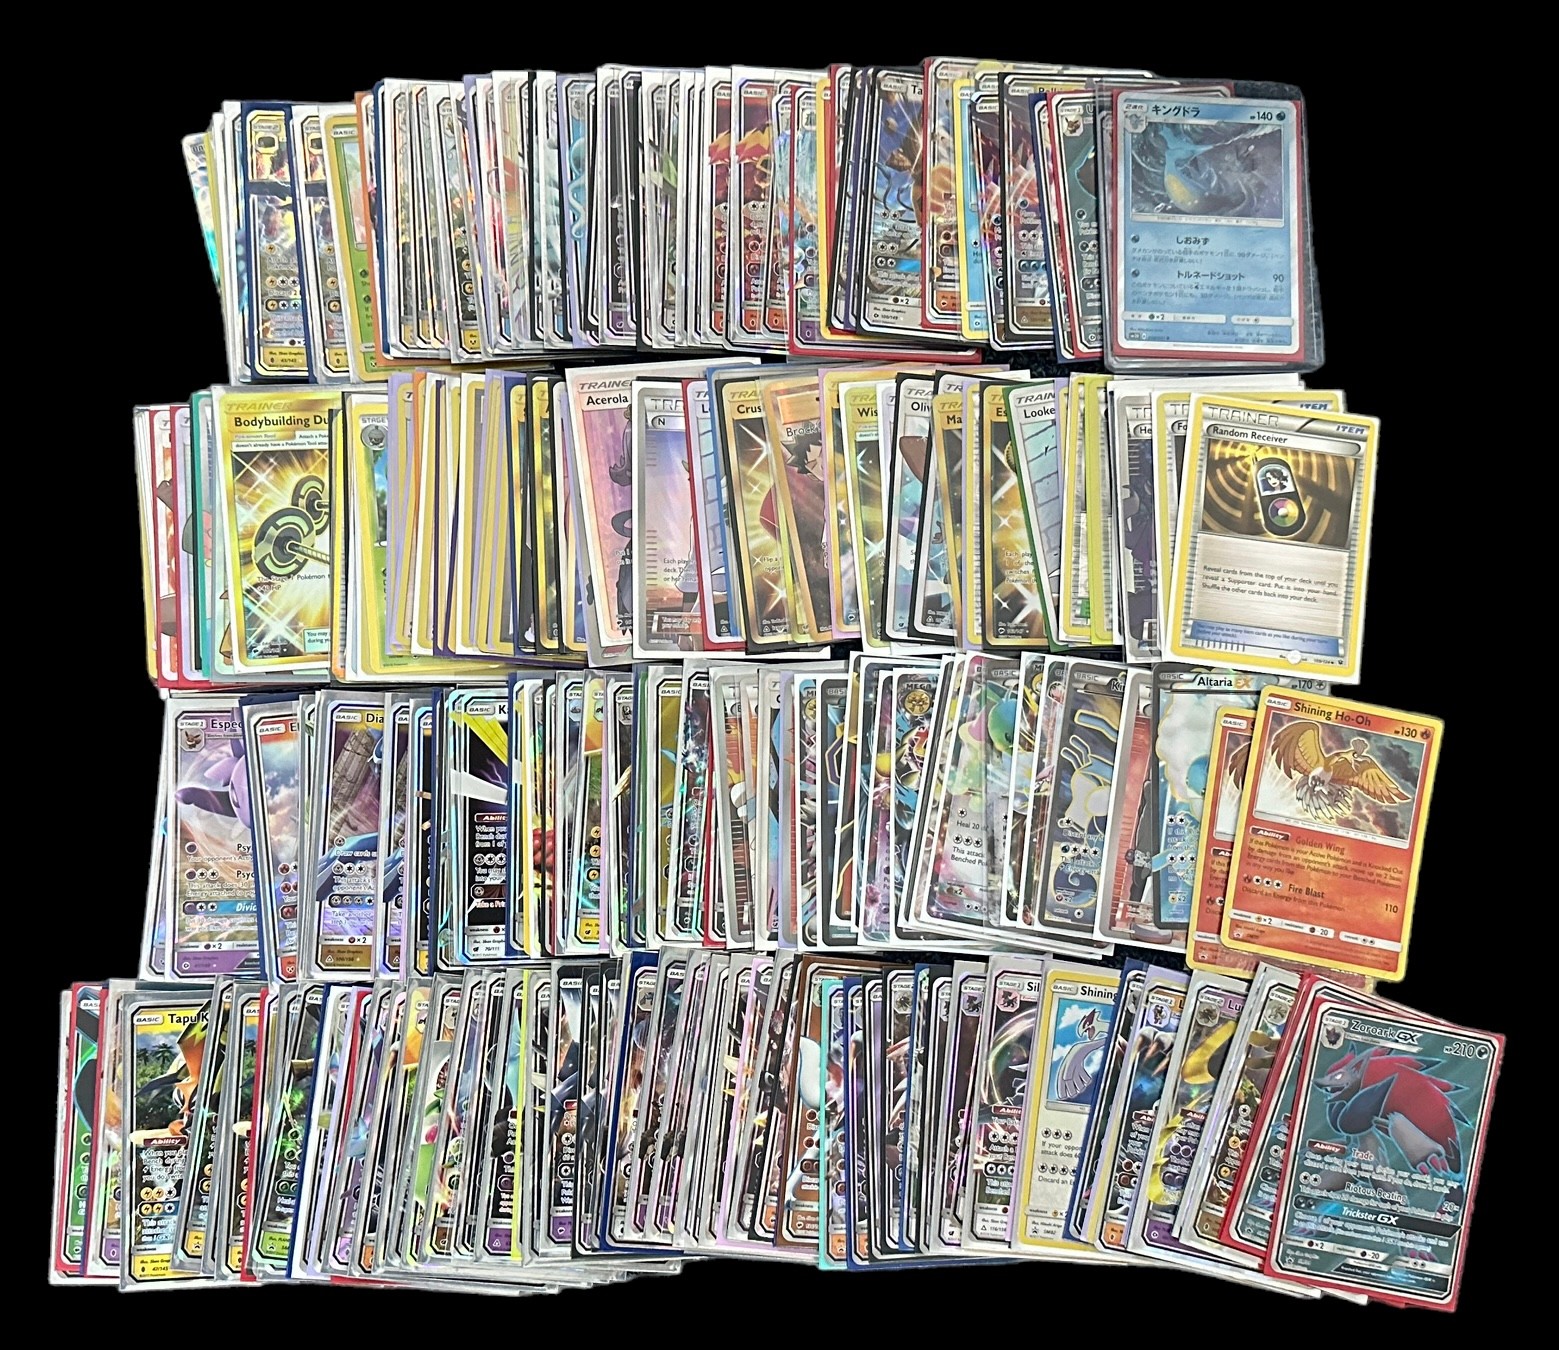 Collection of full art Pokemon cards & trainer cards. Includes Mewtwo GX 78/73, Turtonator GX 131/